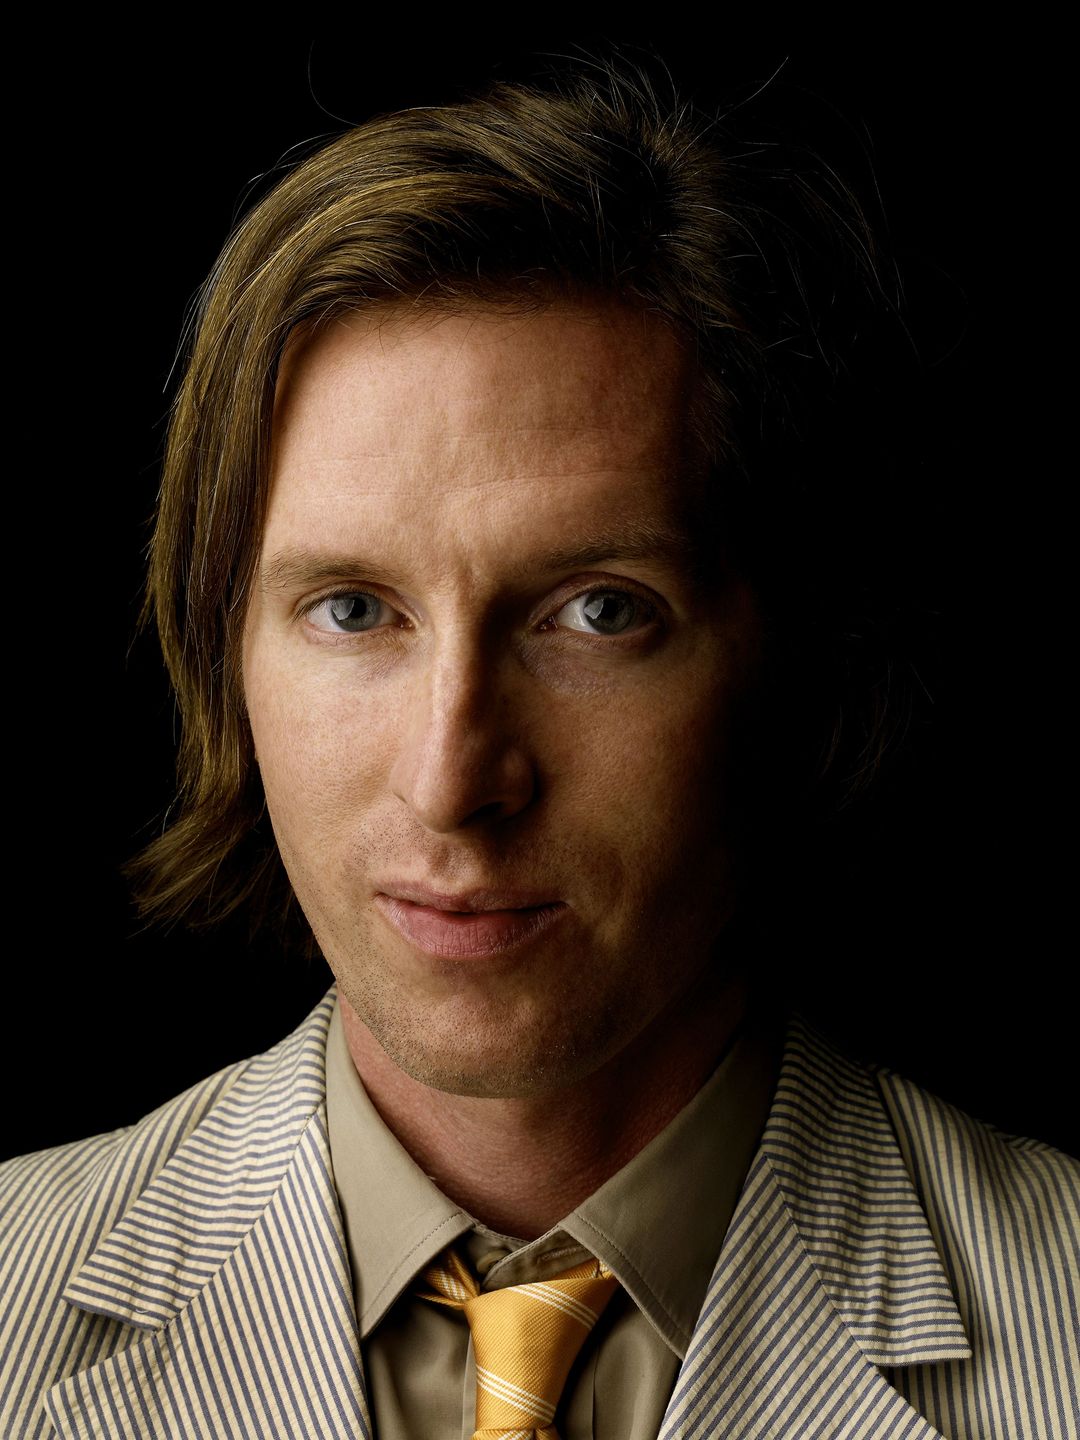 Wes Anderson who is his father